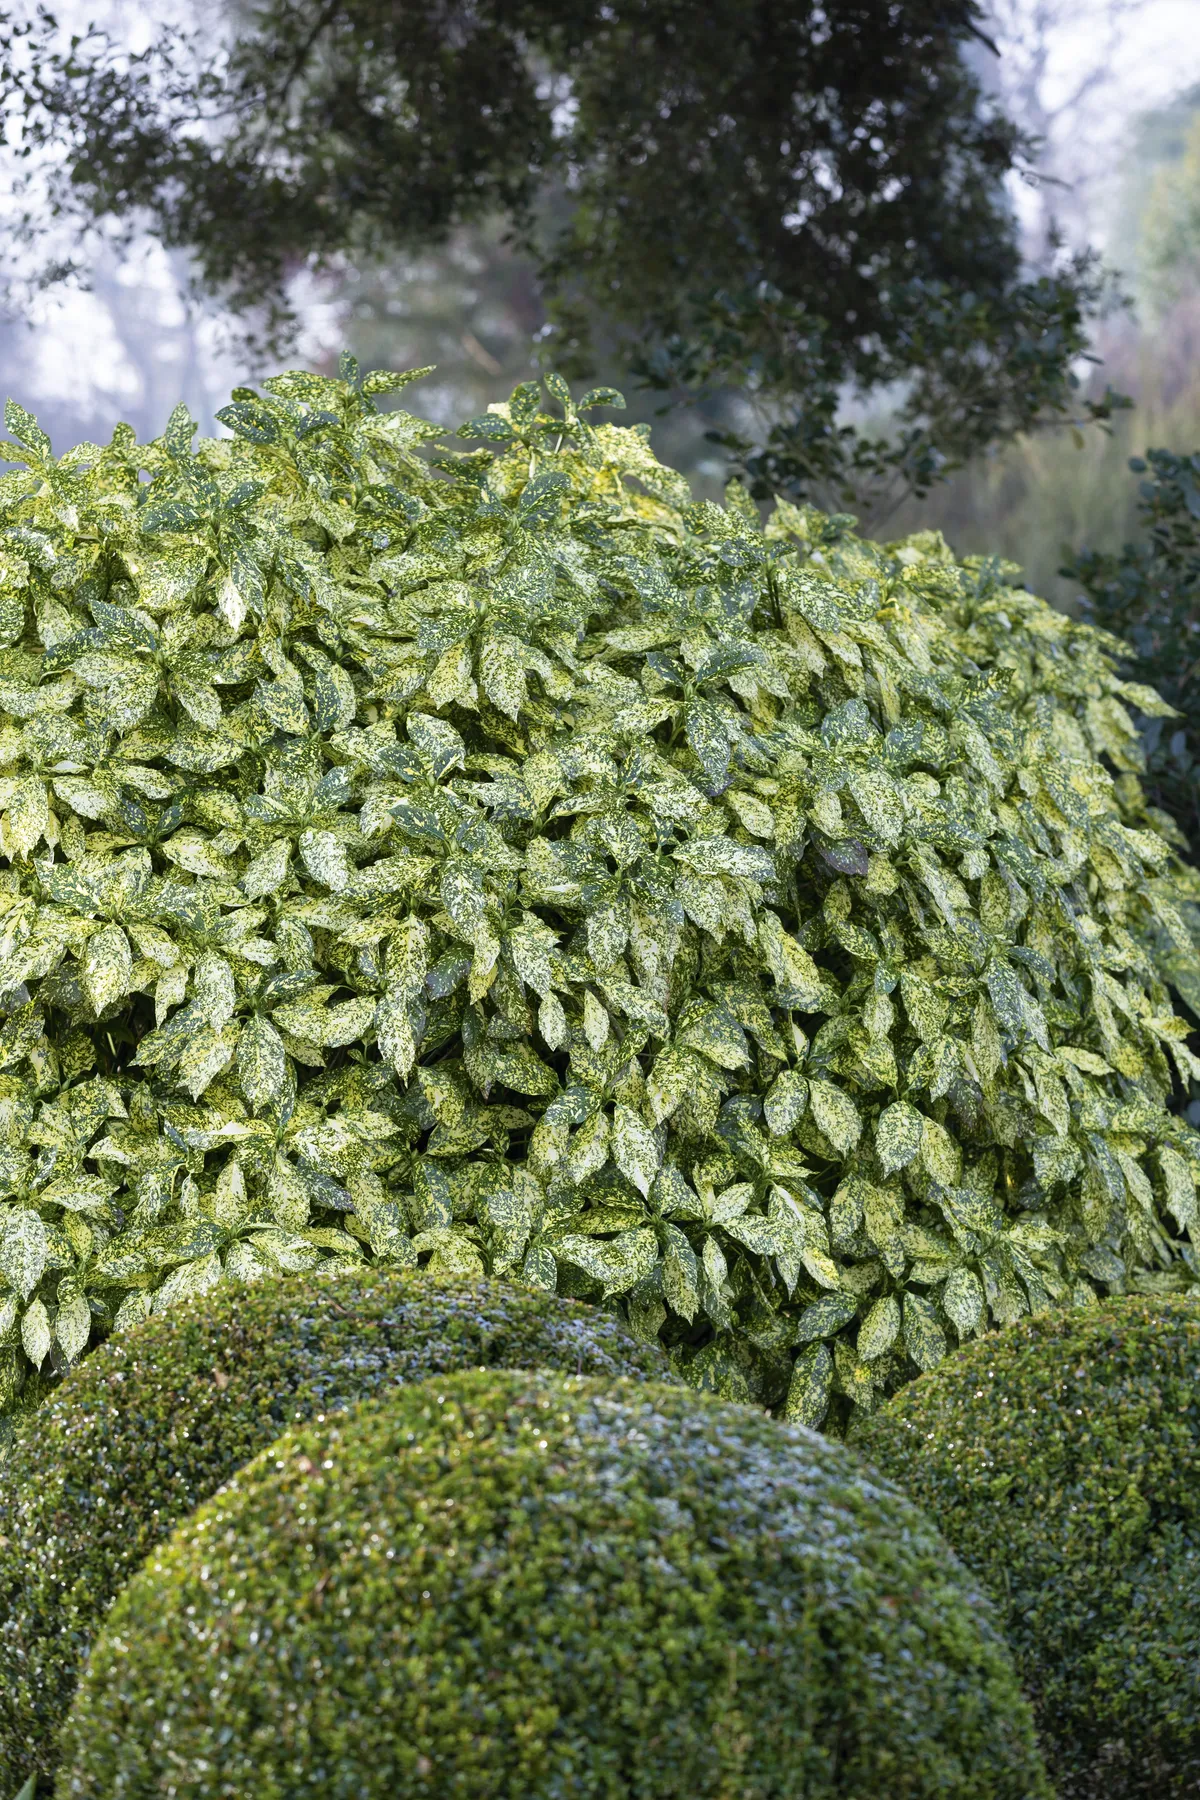 Aucuba japonica ‘Crotonifolia’ A resilient evergreen that will cope with dry and shade, having large, waxy green leaves that are peppered with pale-yellow marks. 3m x 3m. RHS H5, USDA 7a-9b.